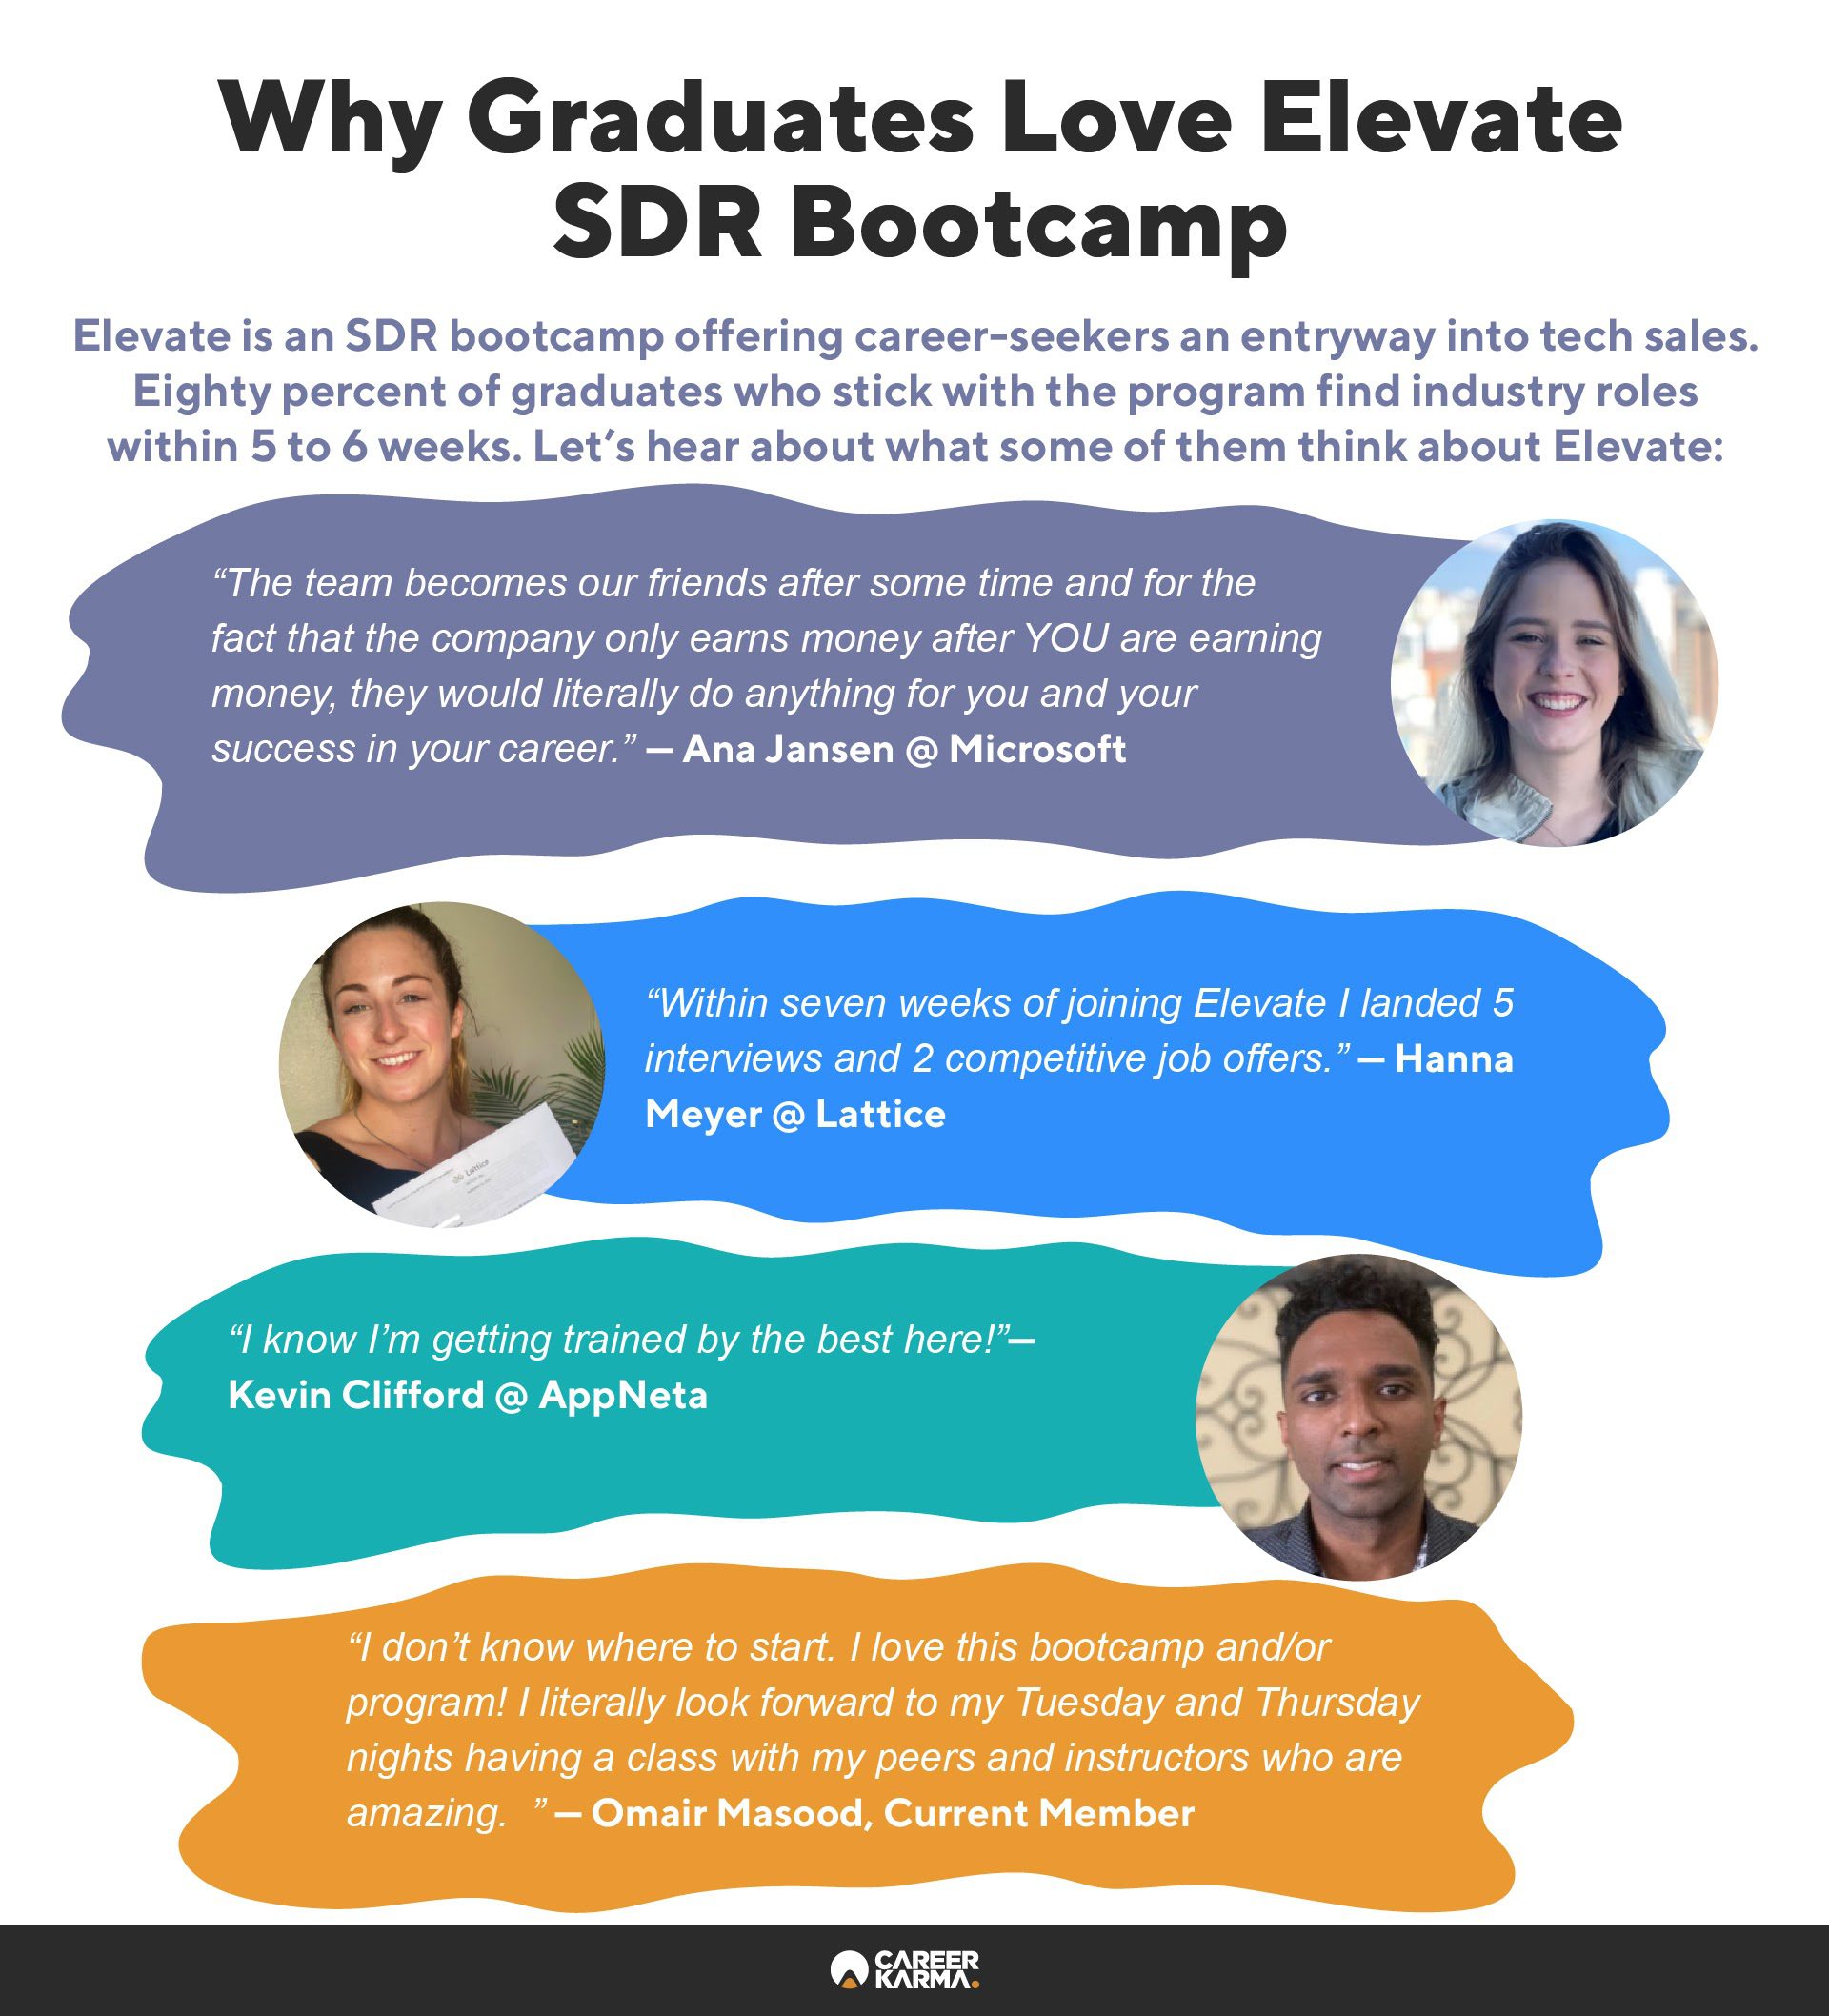 An infographic showing alumni reviews for Elevate bootcamp